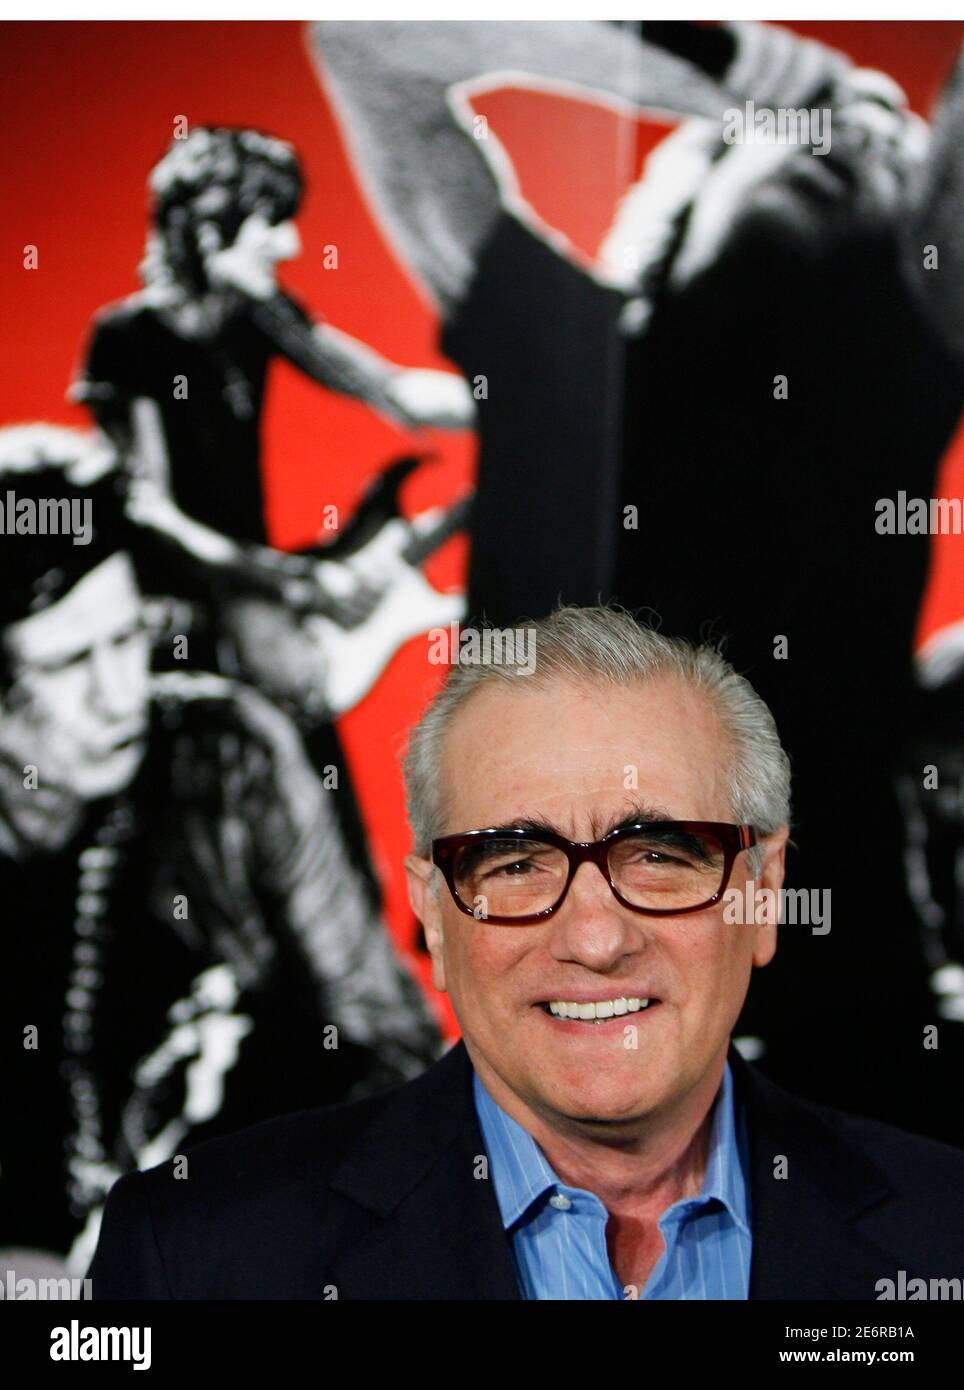 Director Martin Scorsese smiles during a news conference regarding the documentary  film he directed about the Rolling Stones named "Shine A Light" in New York  March 30, 2008. REUTERS/Lucas Jackson (UNITED STATES